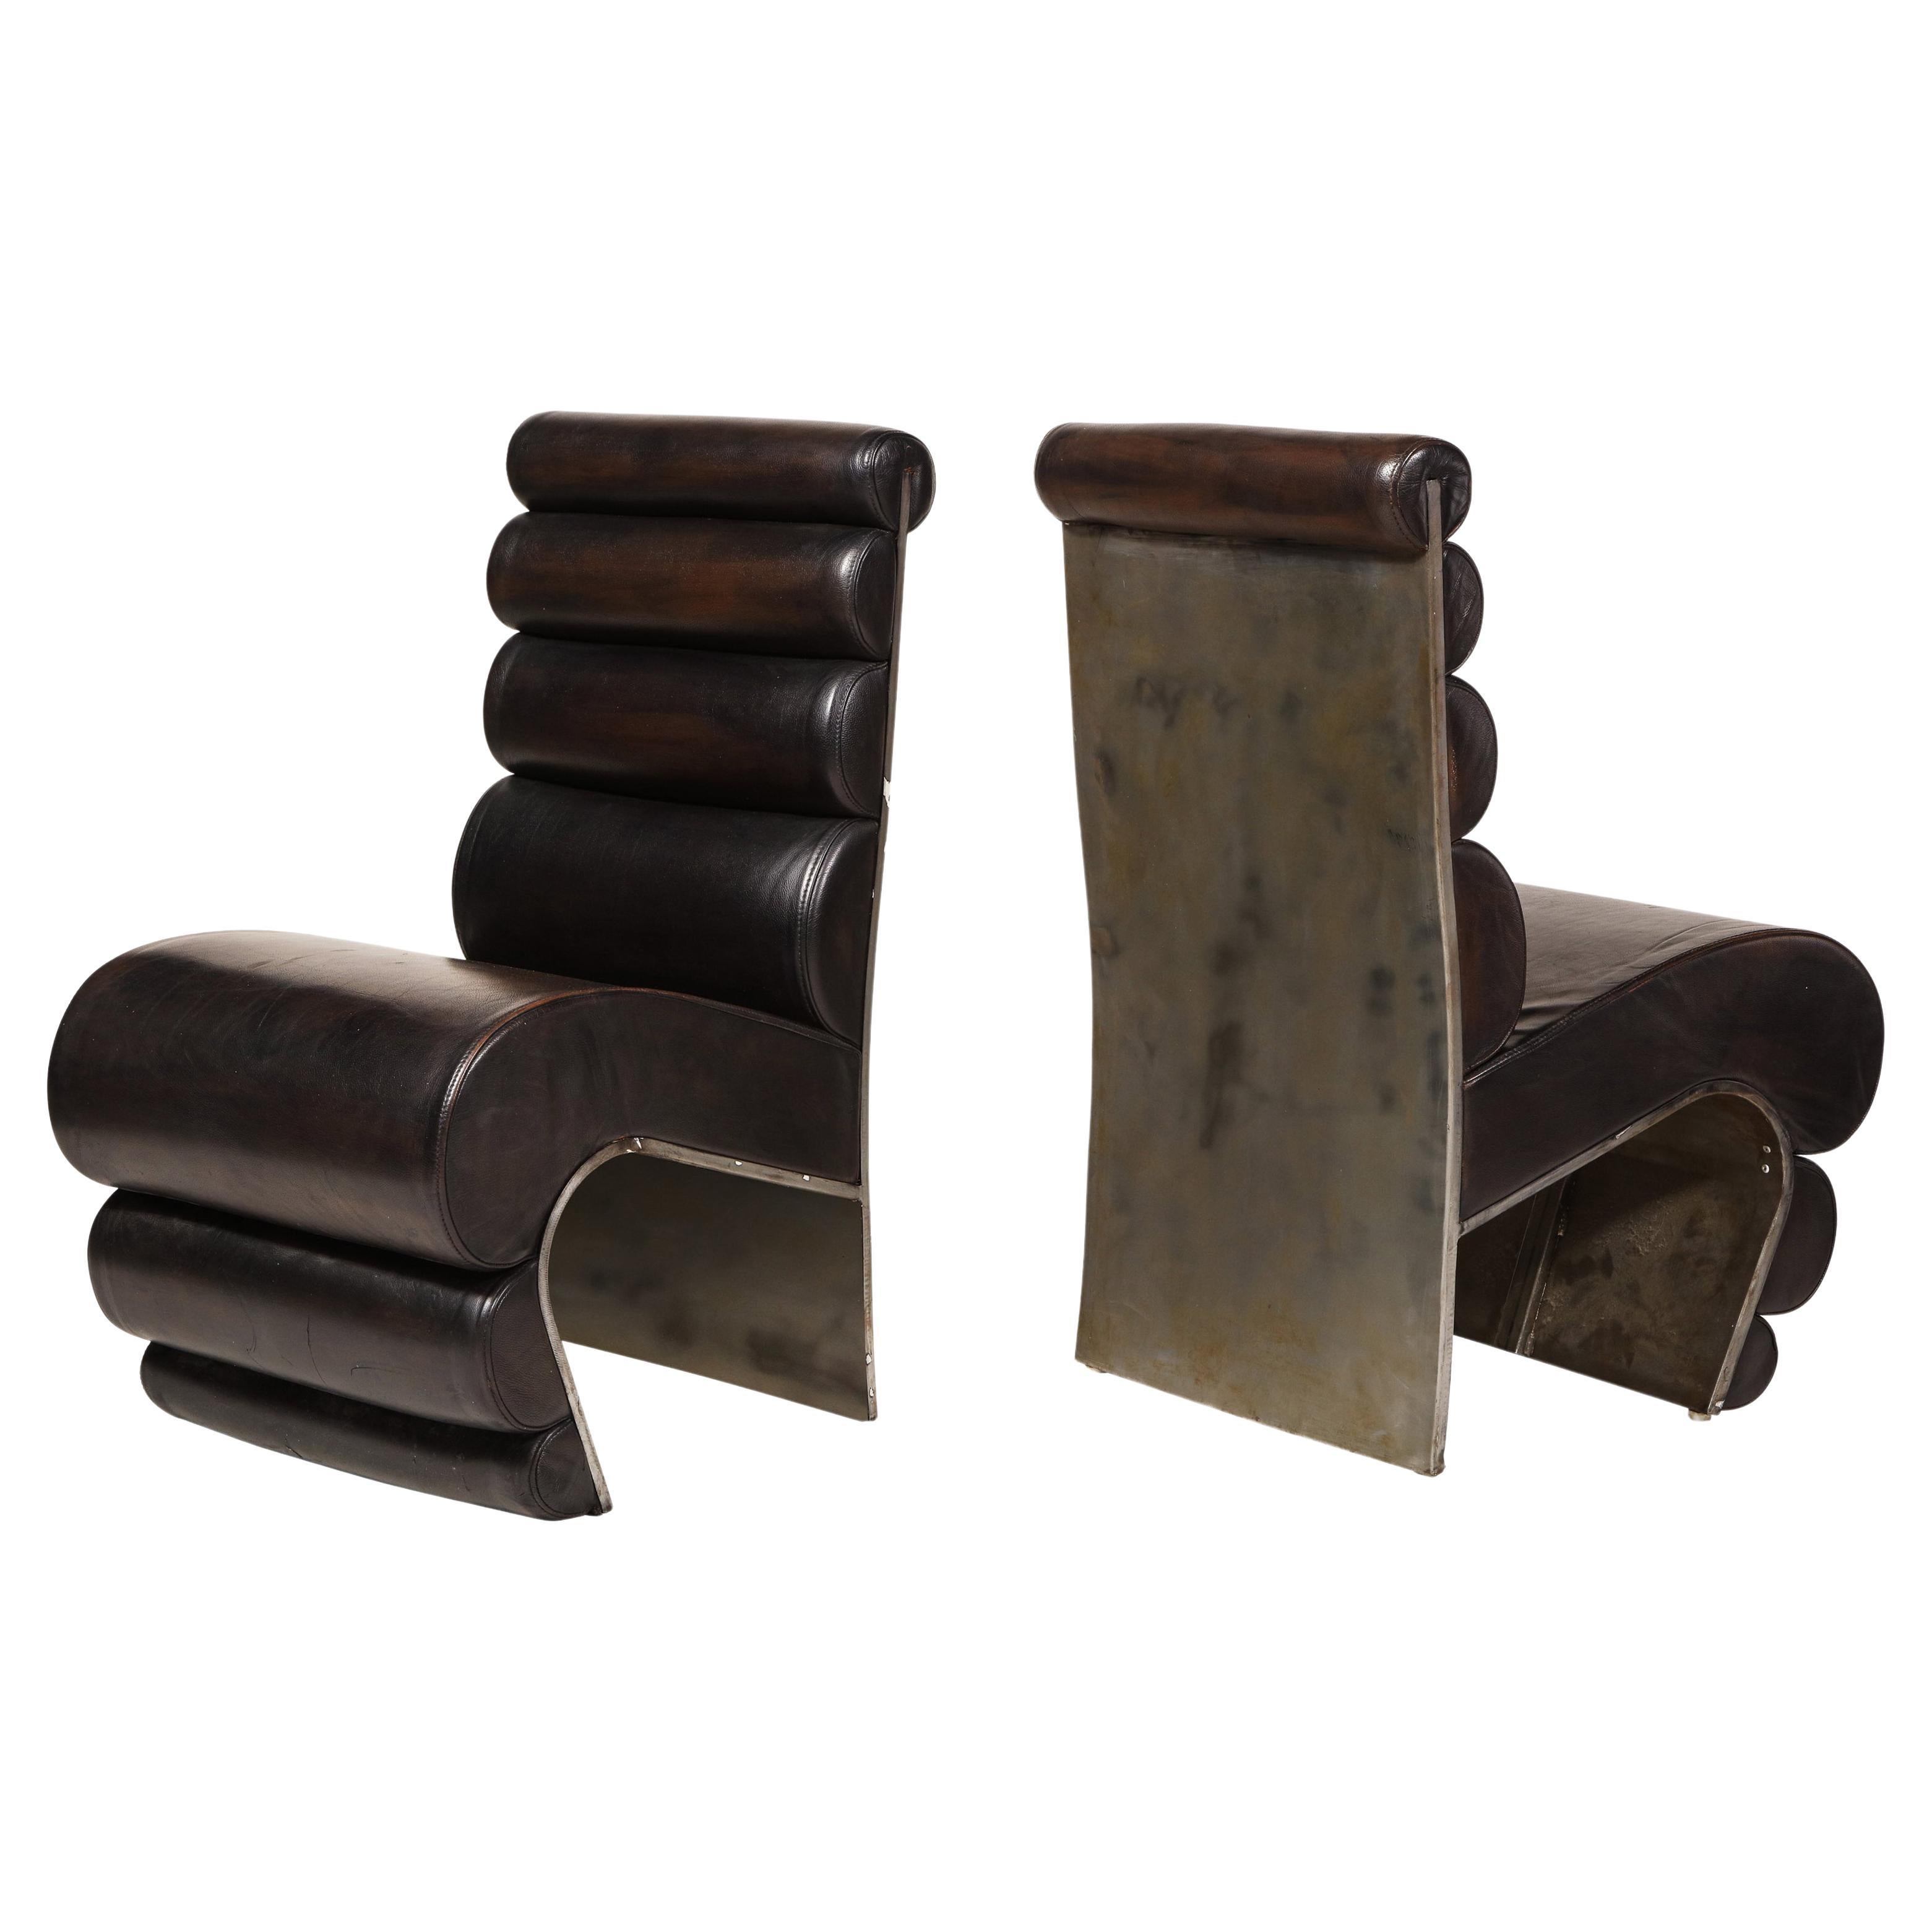 Postmodern Sculptural Steel Brown Leather French Pair of Chairs, 1980s, France For Sale